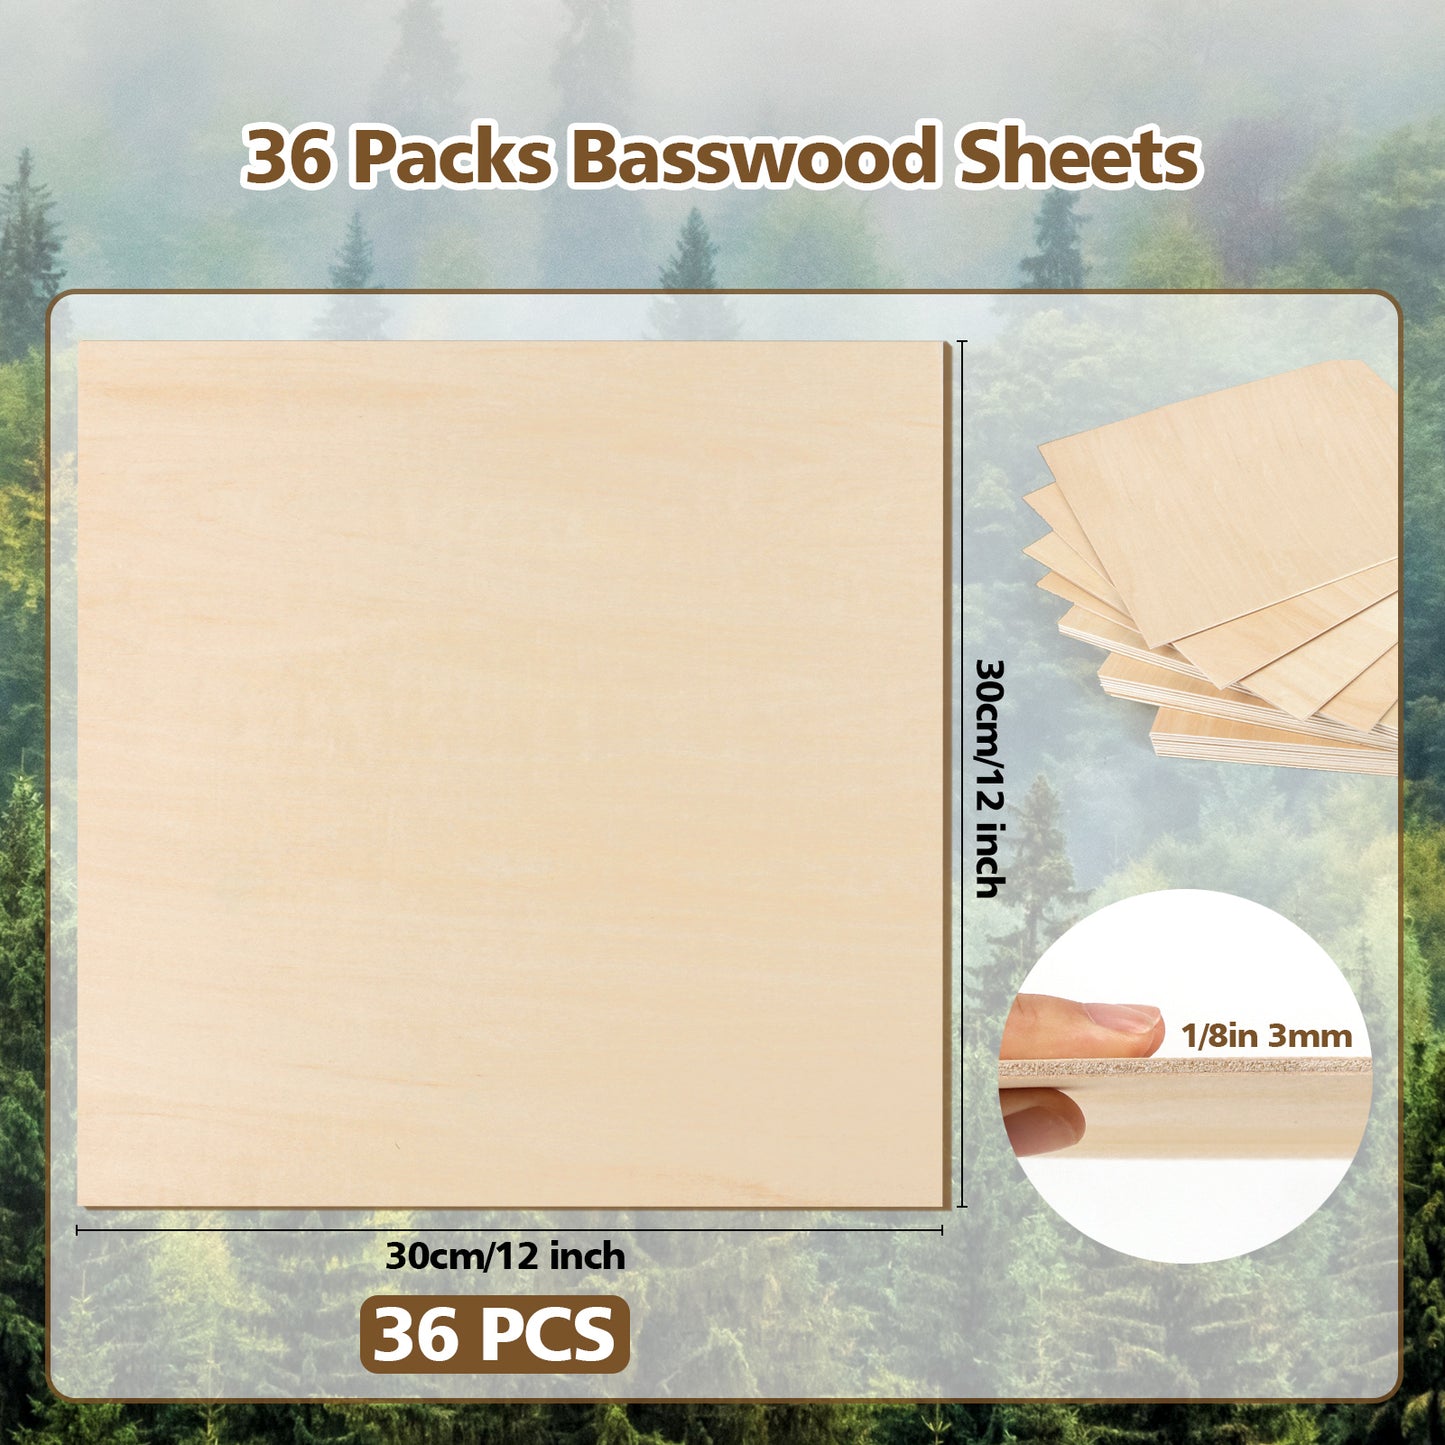 Basswood Sheets 1/8 x 12 x 12 inch - 3mm Basswood Sheets Plywood Sheets Balsa Wood, 36Pcs Square Unfinished Wood Board for DIY Crafts, Laser Cutting, Wood Burning, Painting, Model Carving